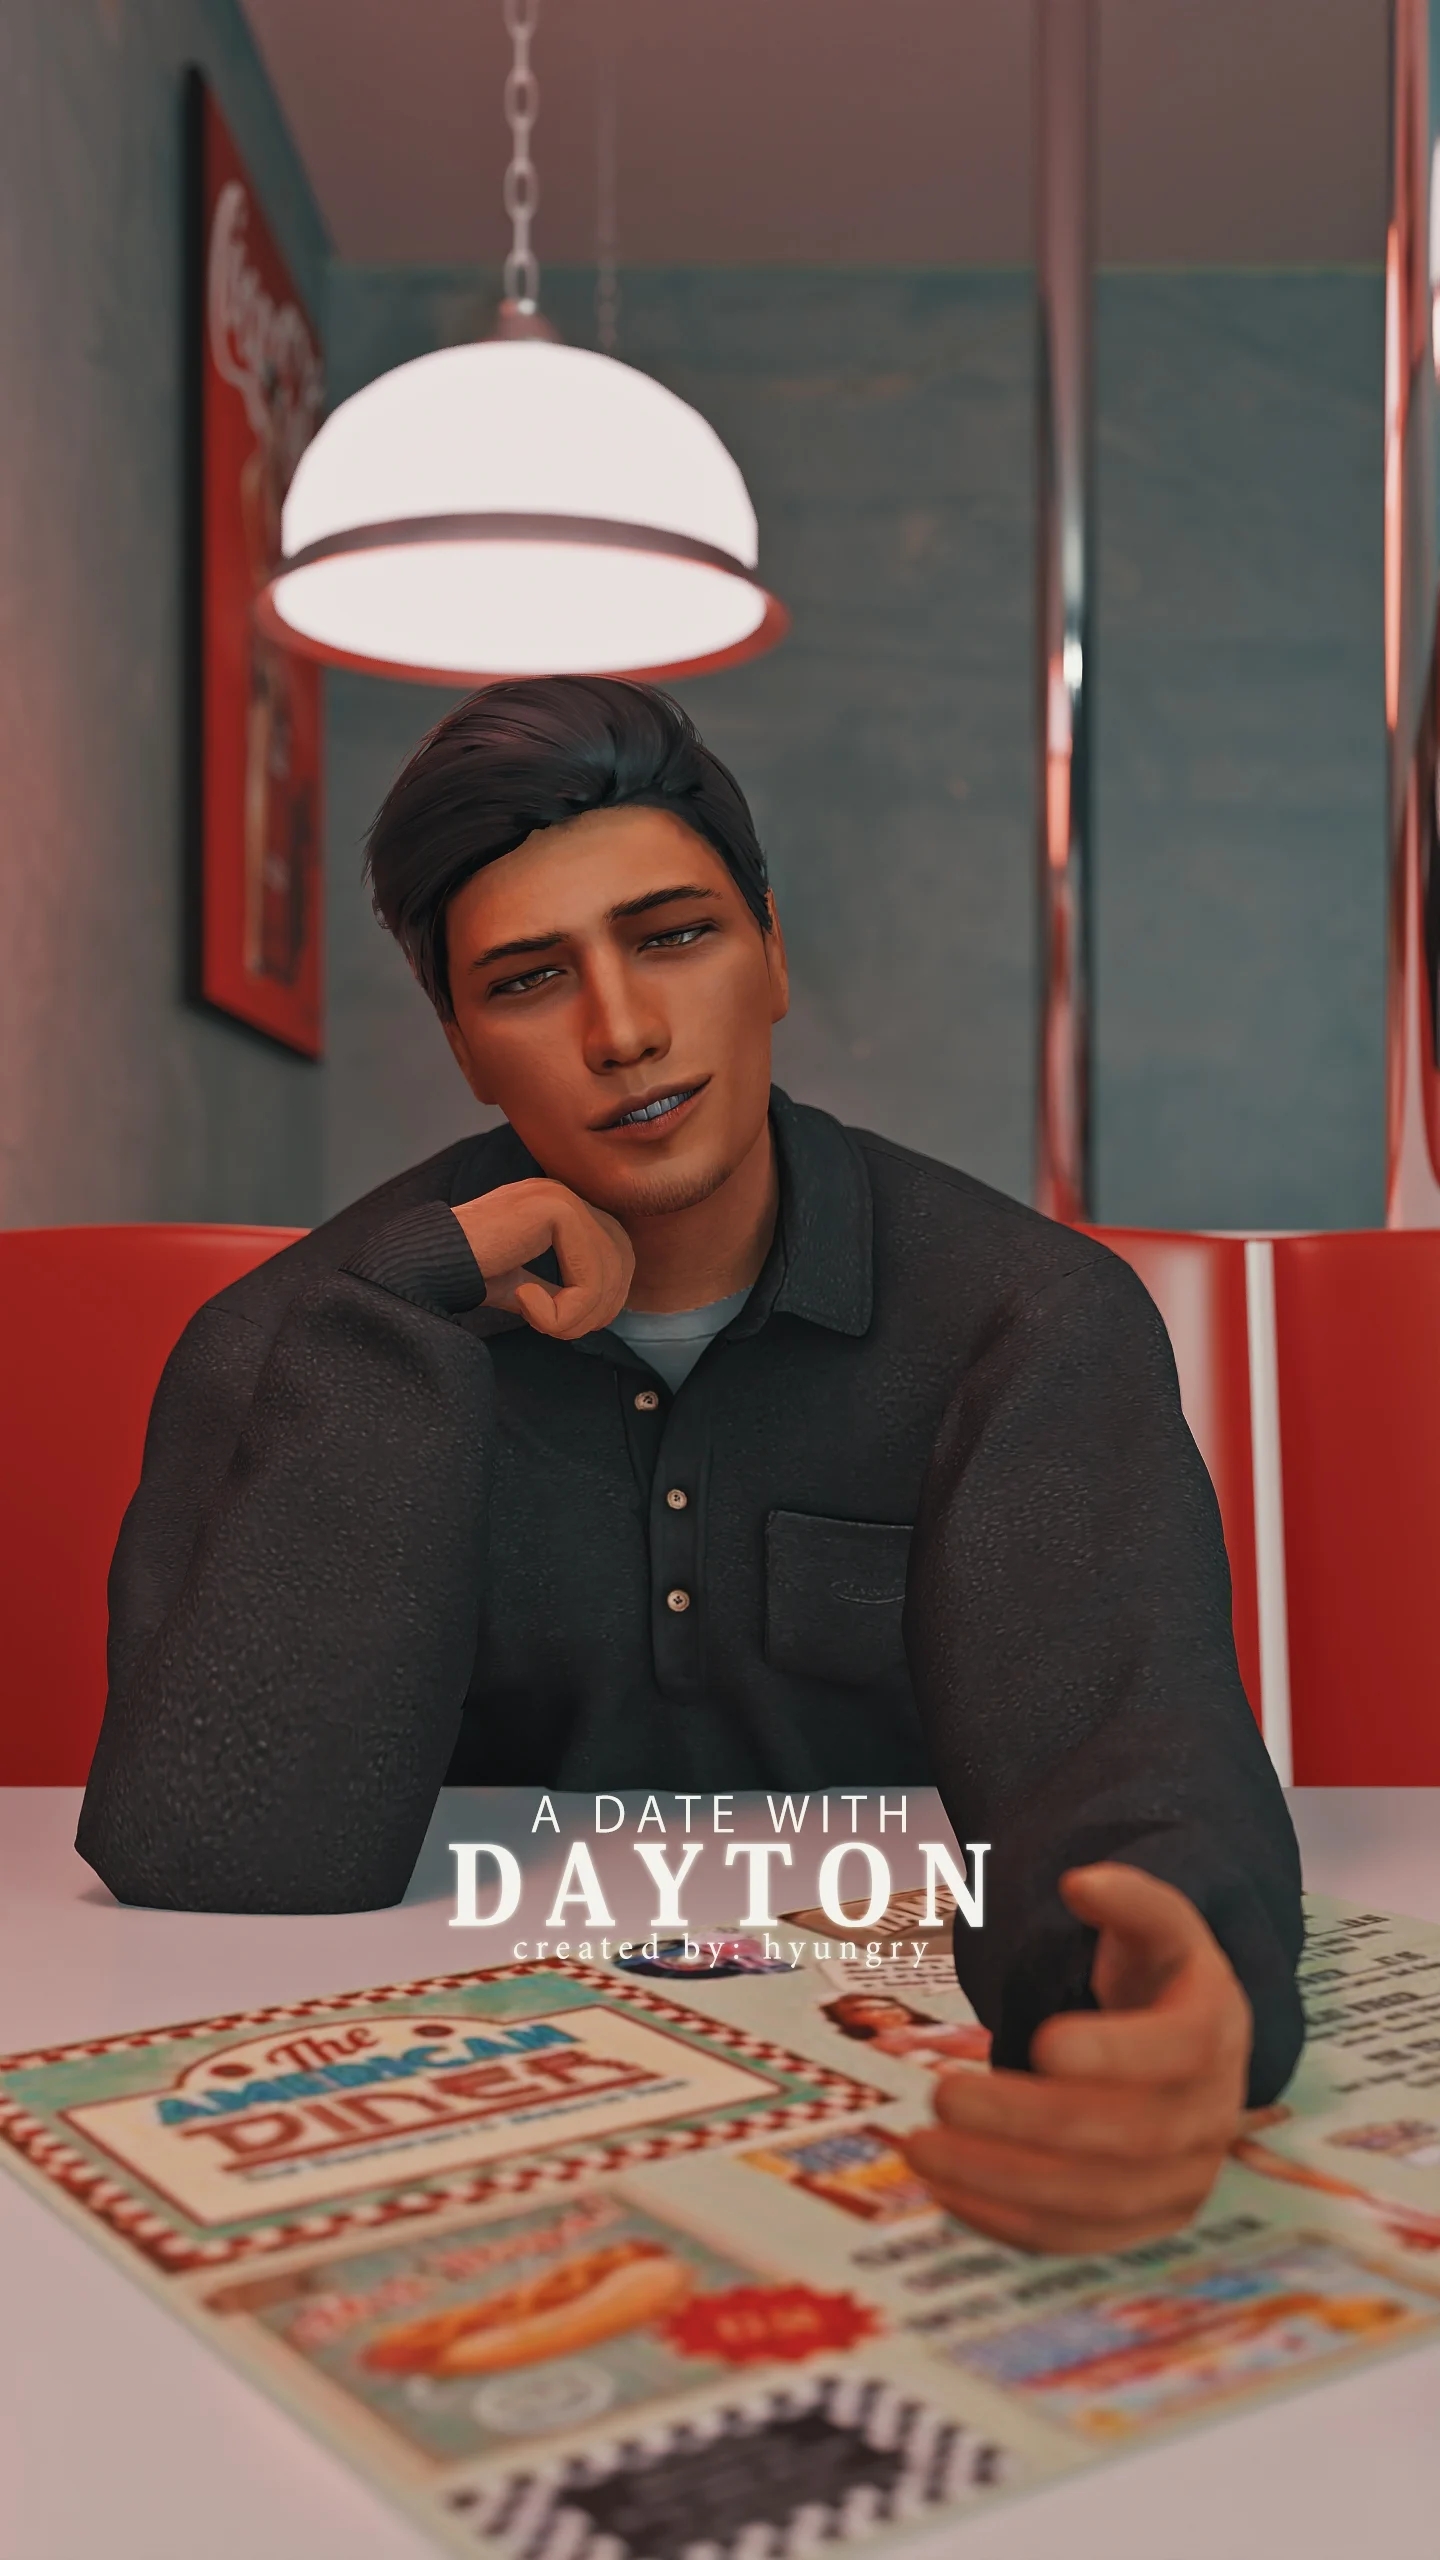 [ENG] Hyungry – A Date with Dayton